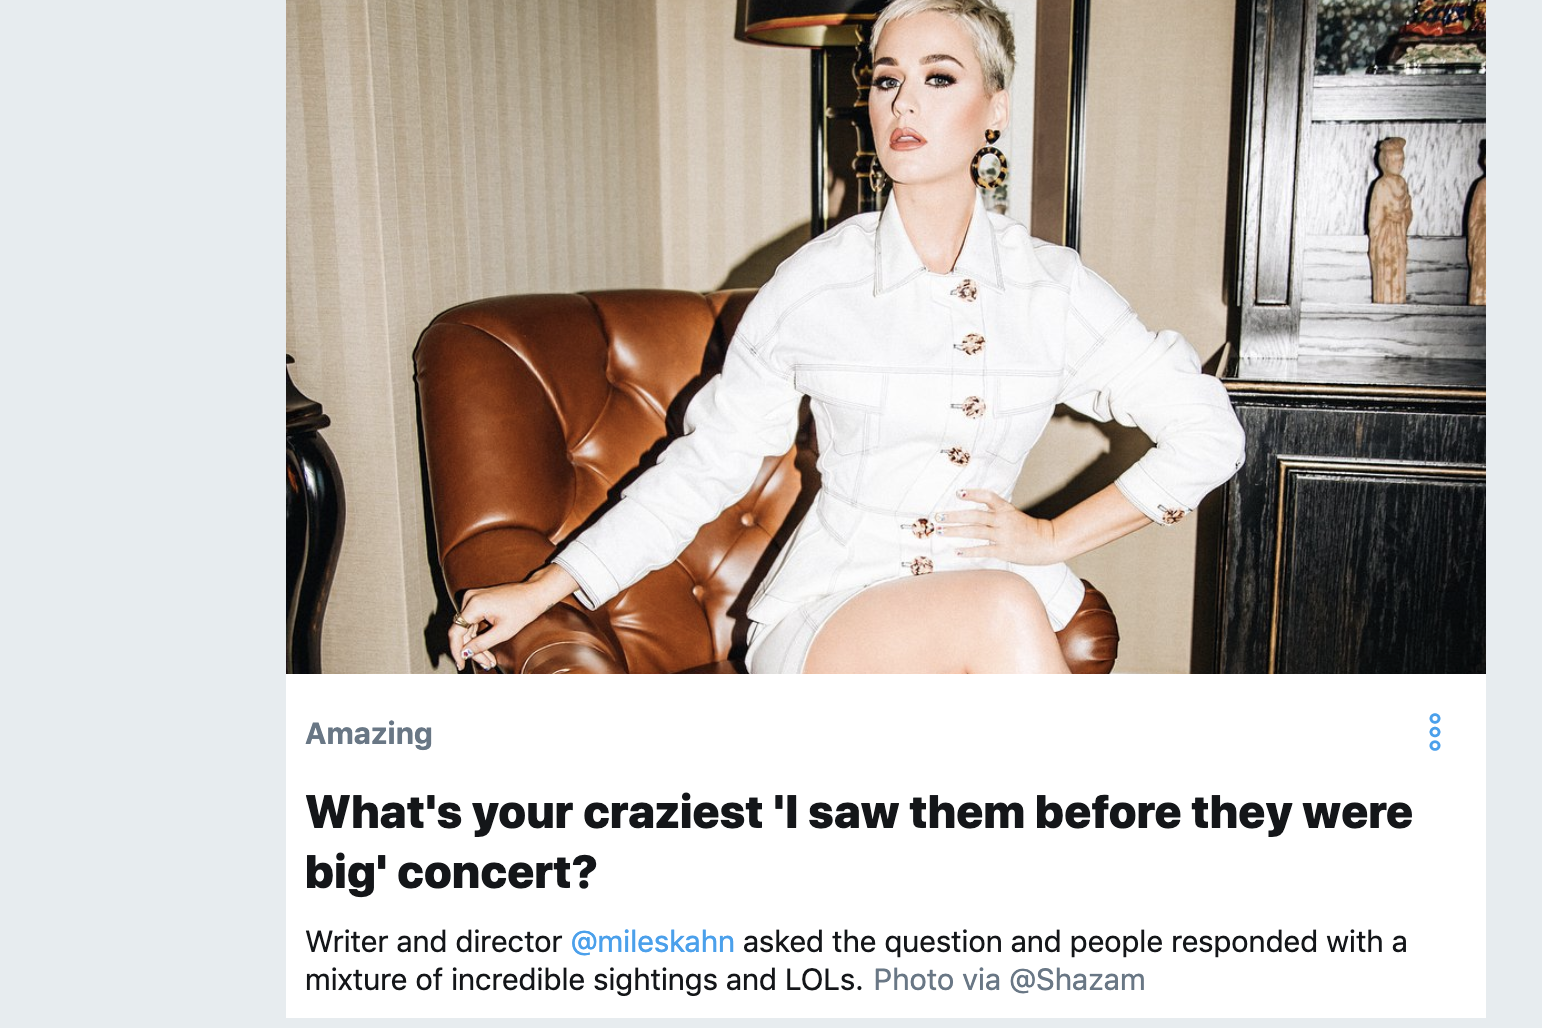 A Twitter Moment featuring a photo of Katy Perry.